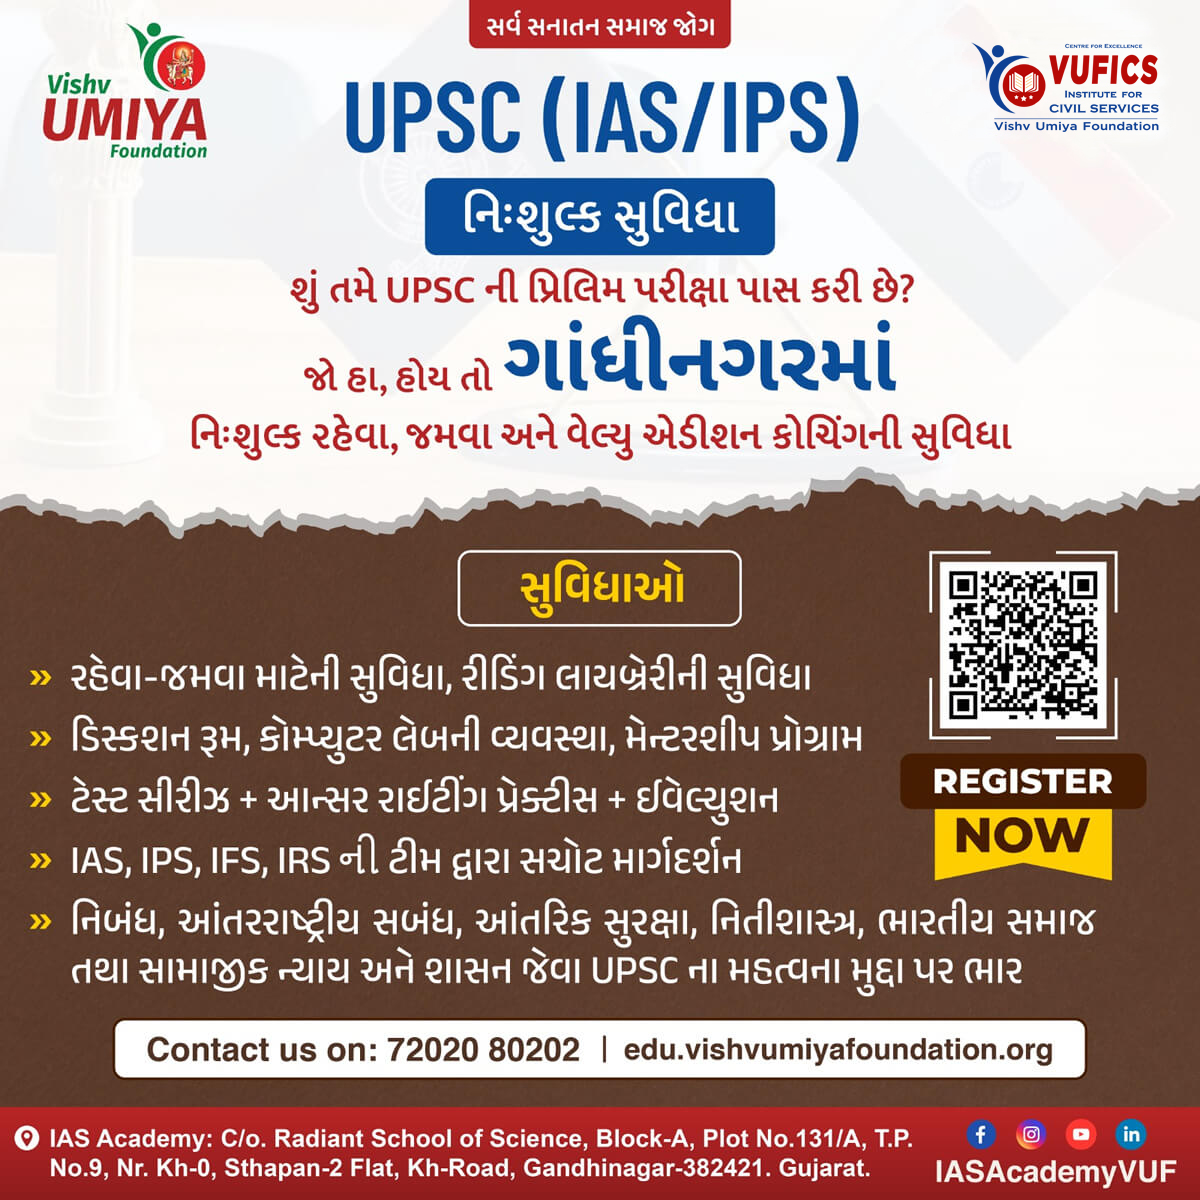 Inquiry Form for UPSC and GPSC Mains Students